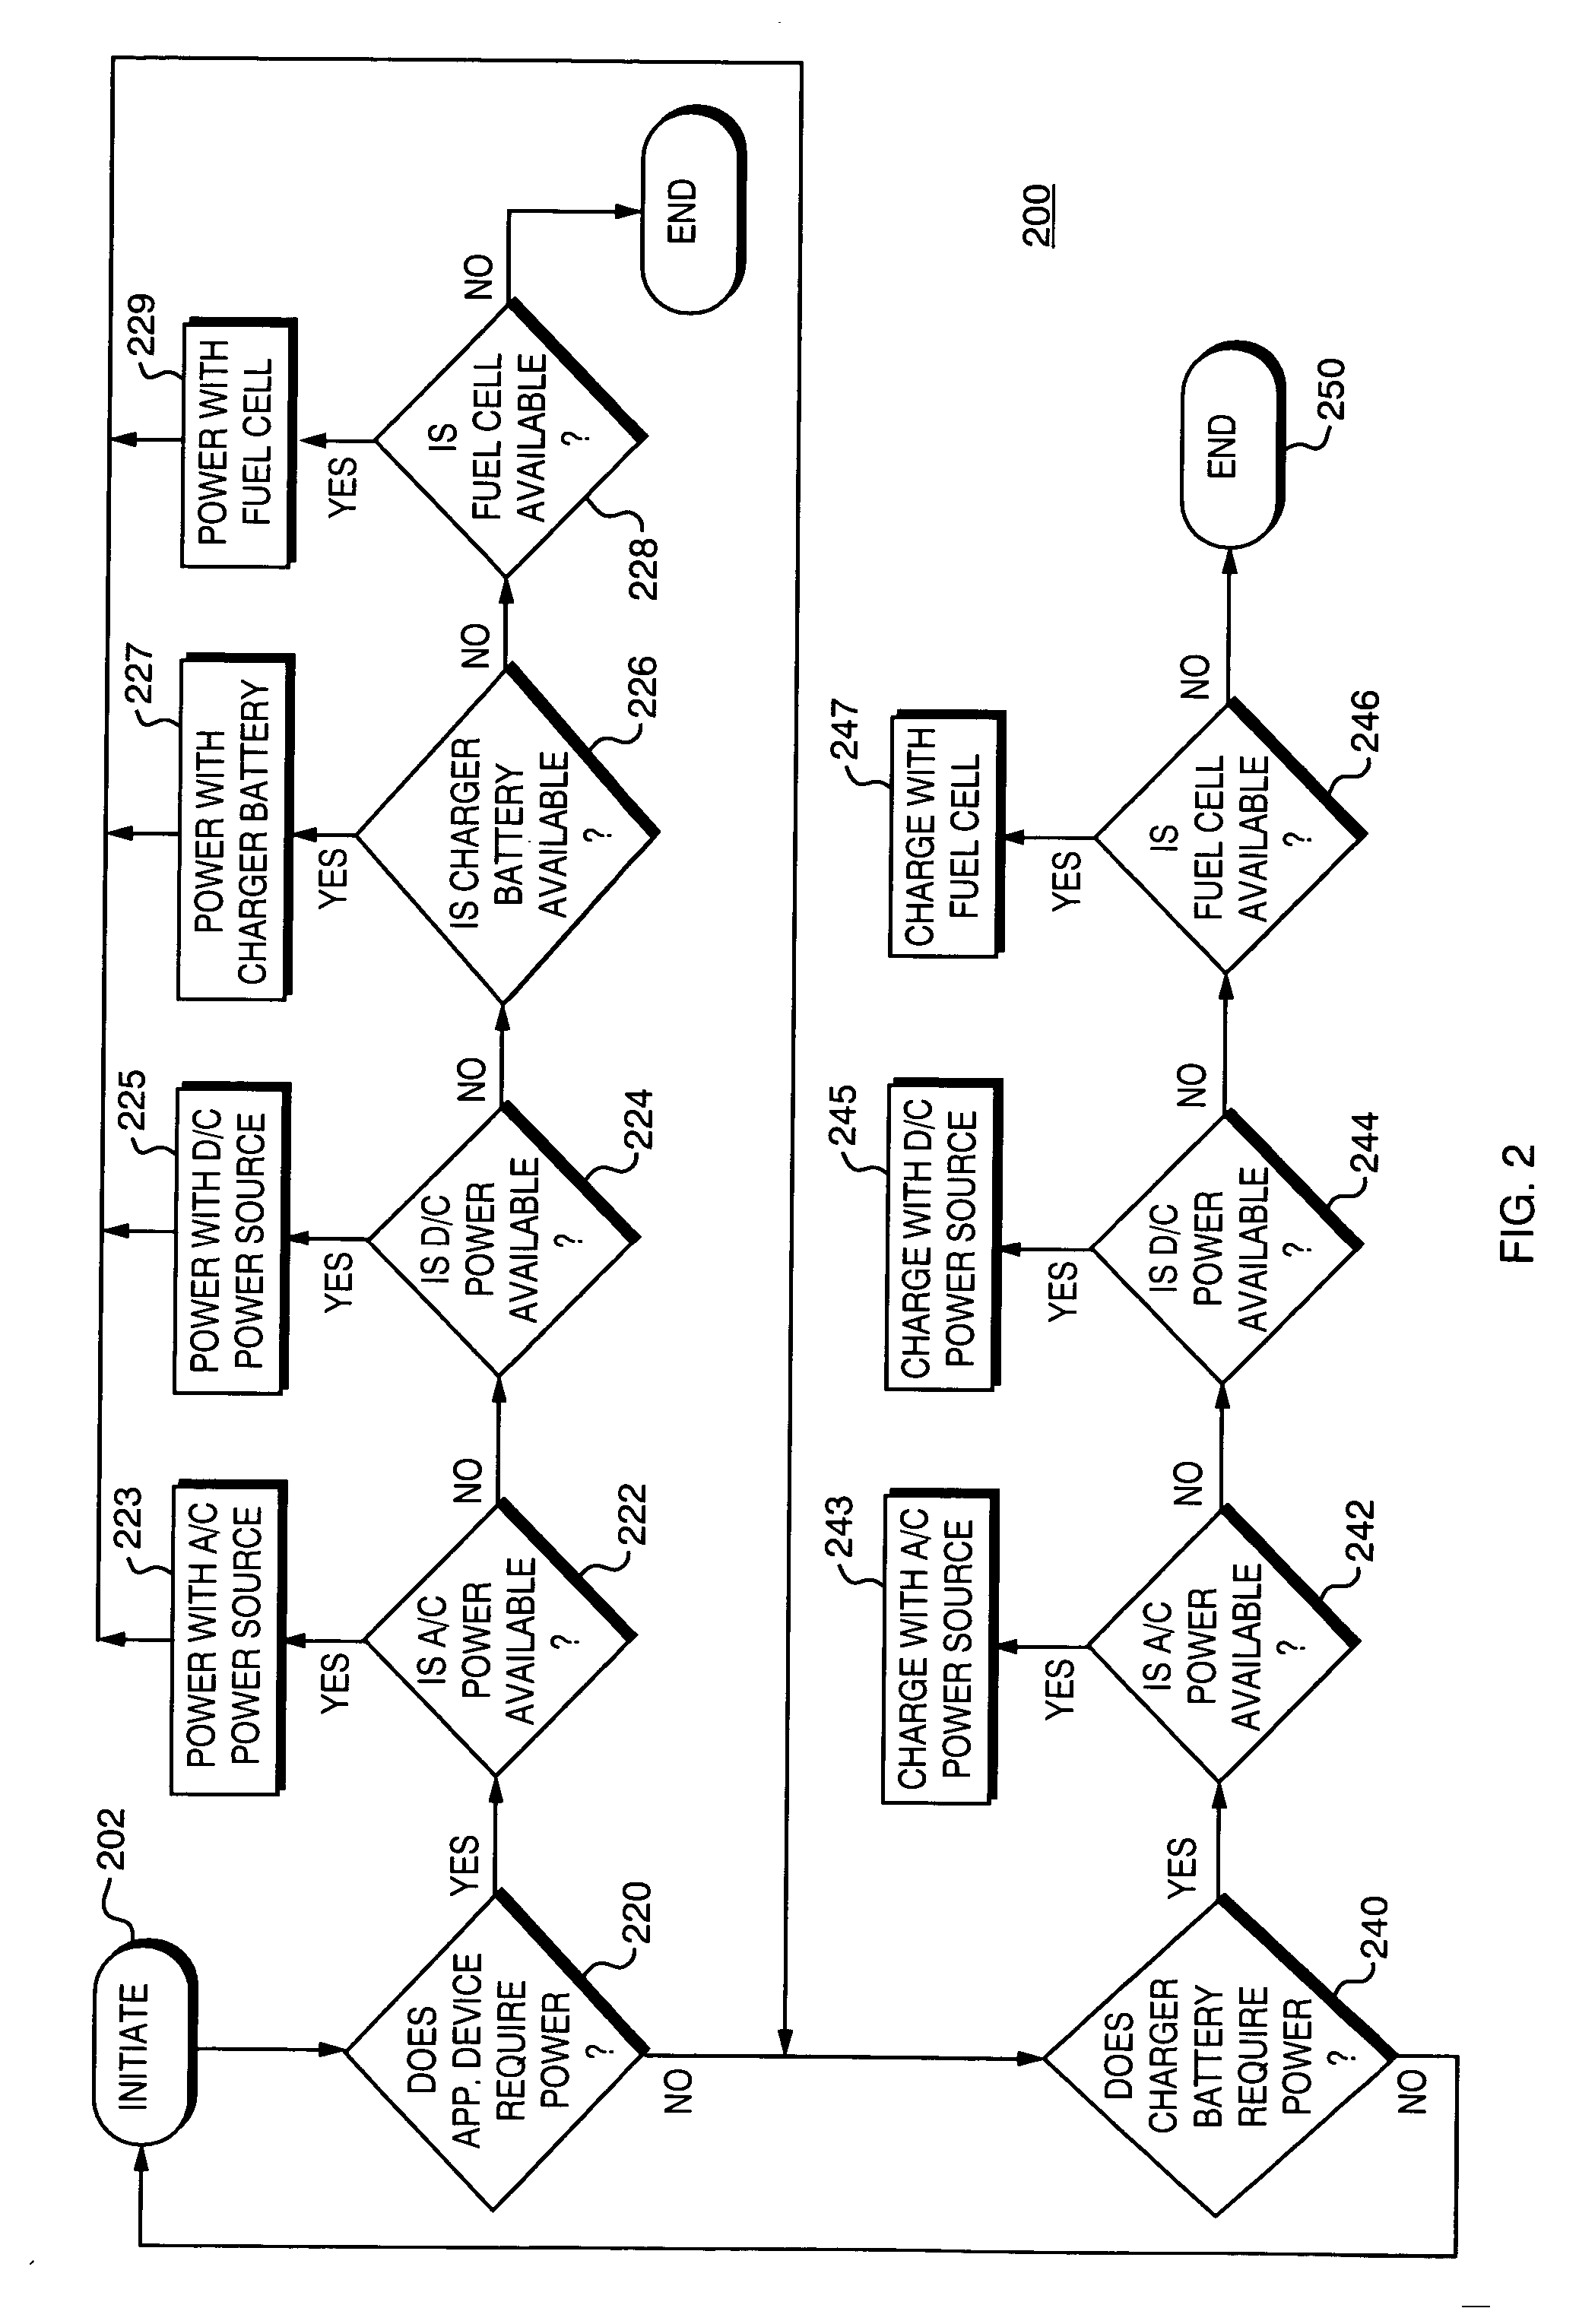 A/C - D/C power system with internal fuel cell